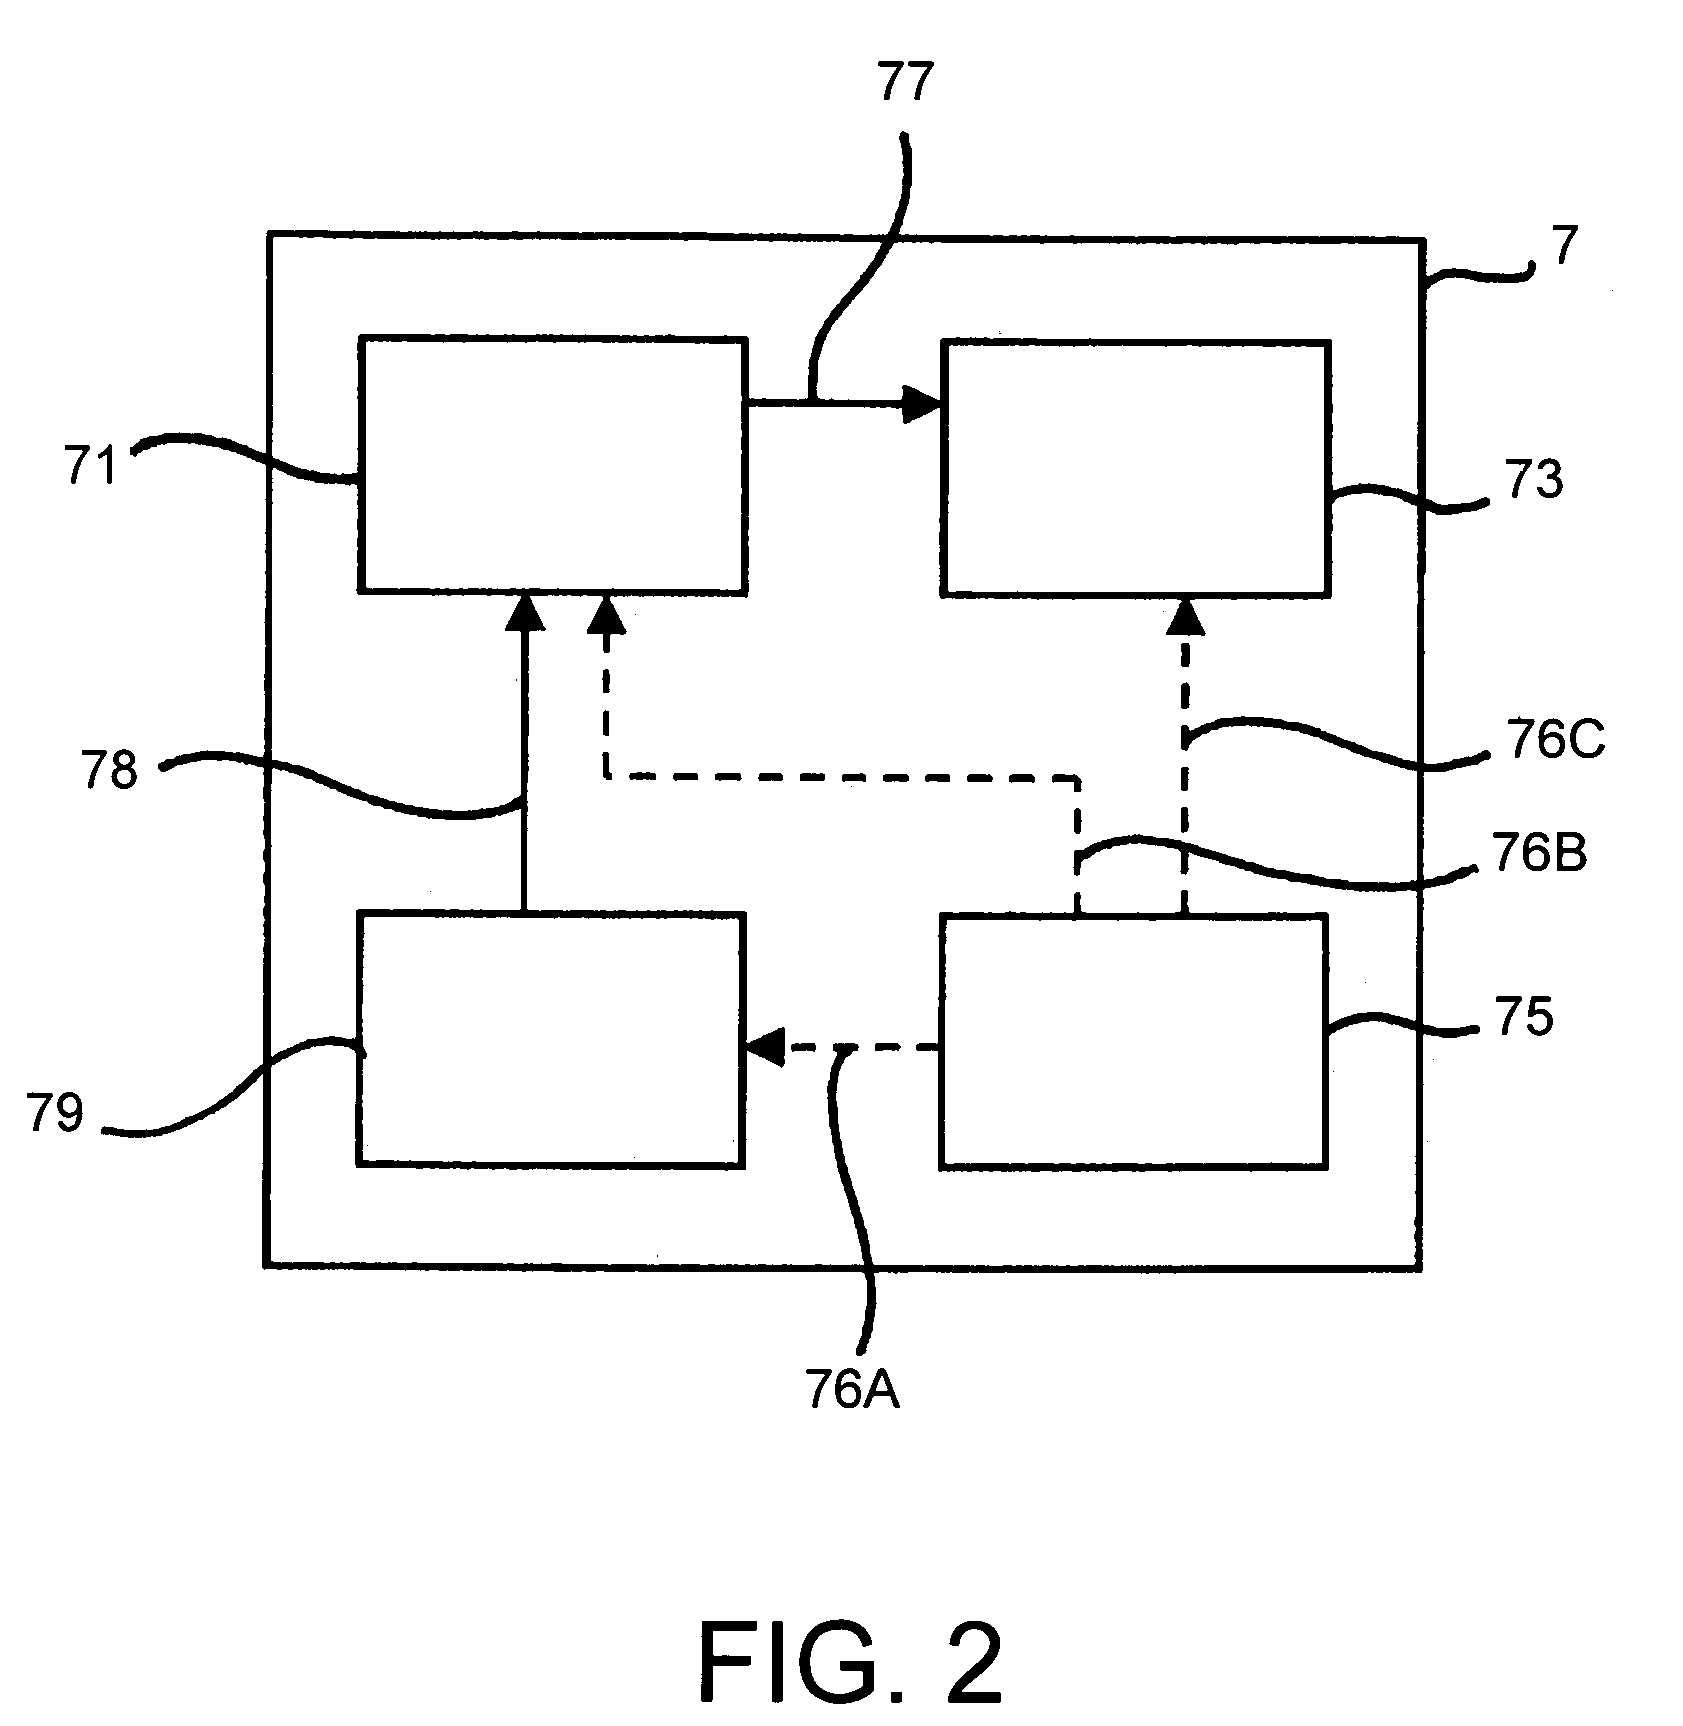 Optical observation apparatus with video device